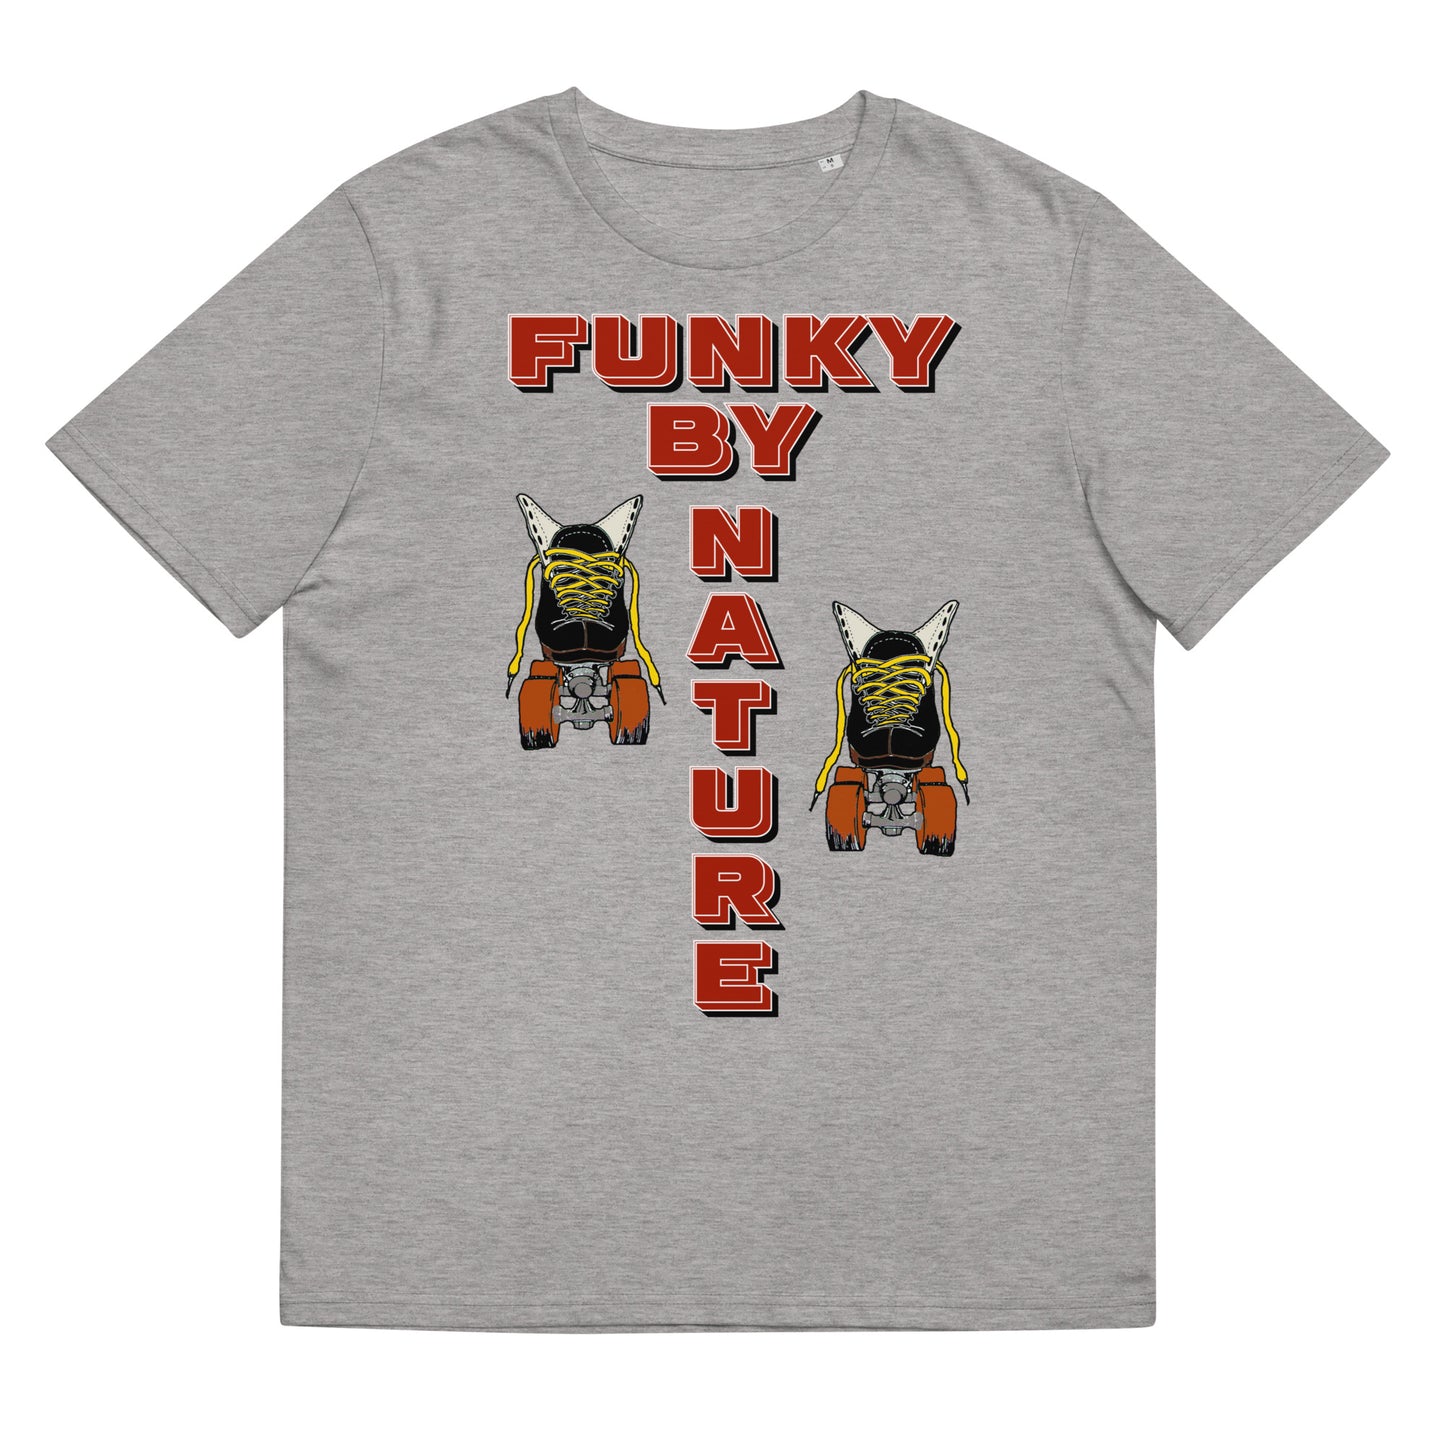 Tshirt Funky by Nature